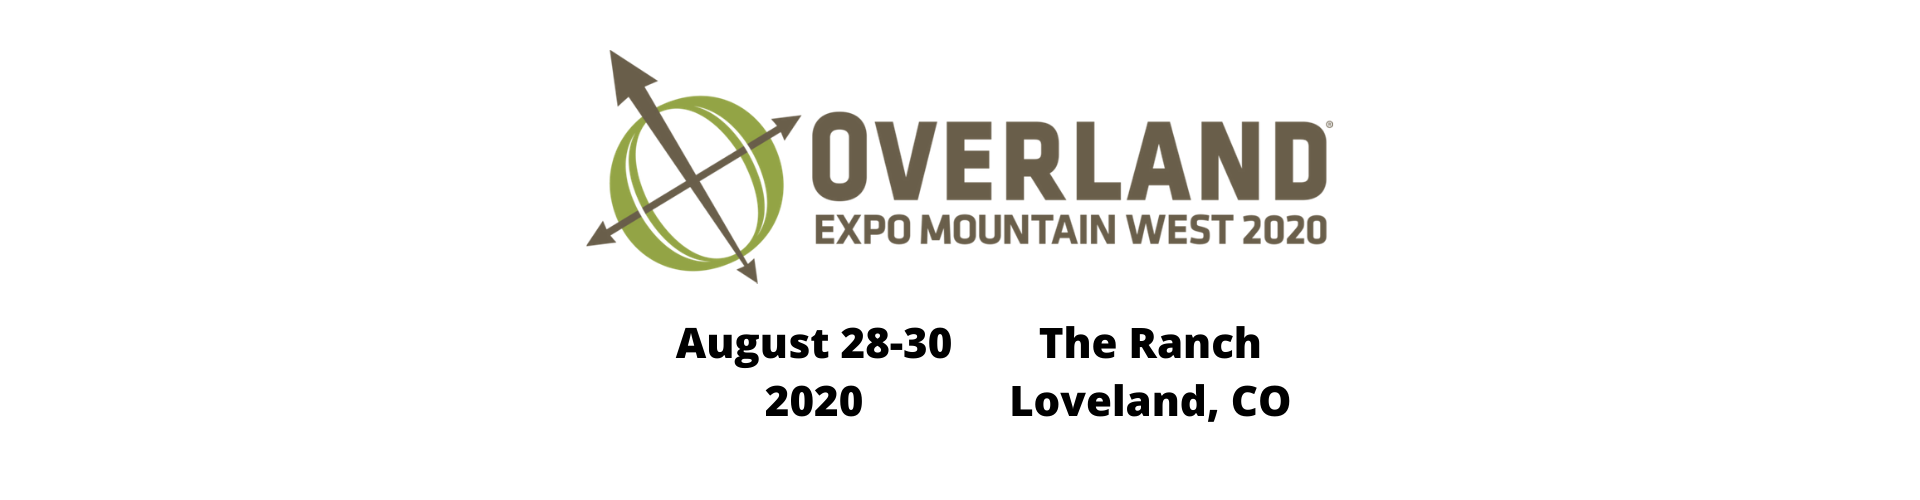 overland expo mountain west 2021